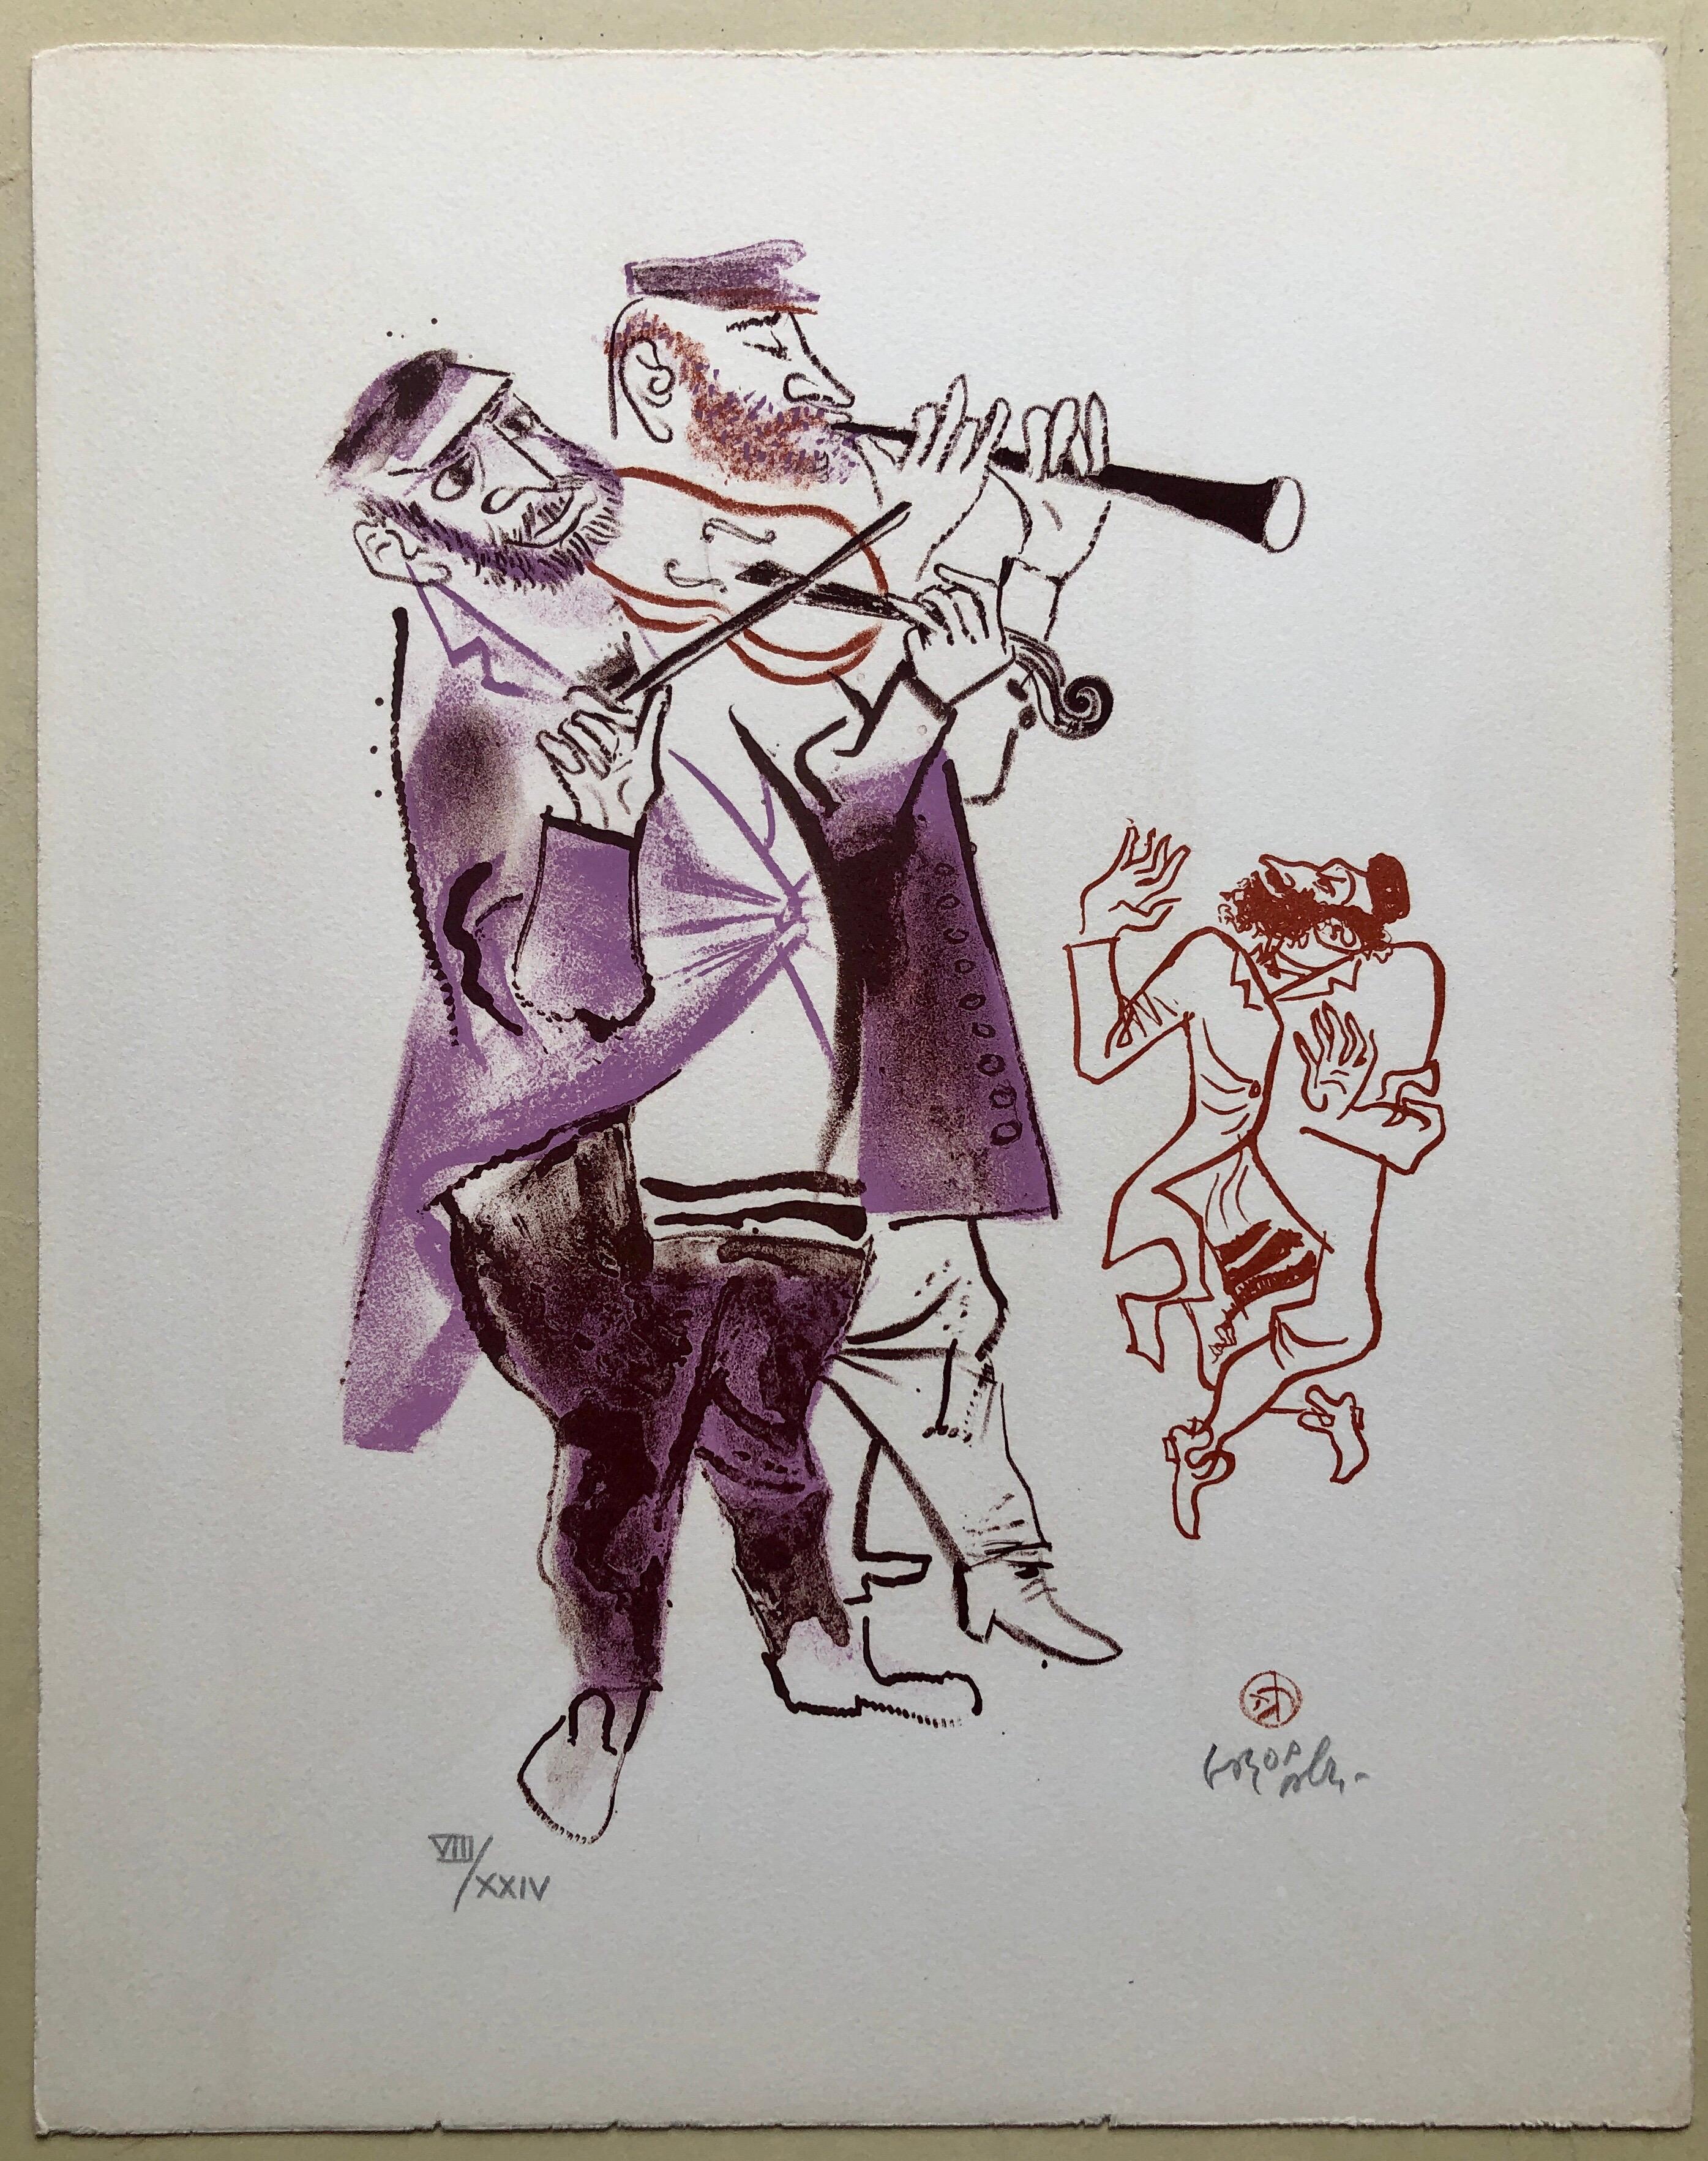 
Hand signed in pencil and numbered with Roman numerals 8/24. A very small edition.
Old Lower East Side of New York or East European Shtetl. Jewish Shtetl Klezmer Musicians. humorous Yiddish art.
The New-York born artist William Gropper was a